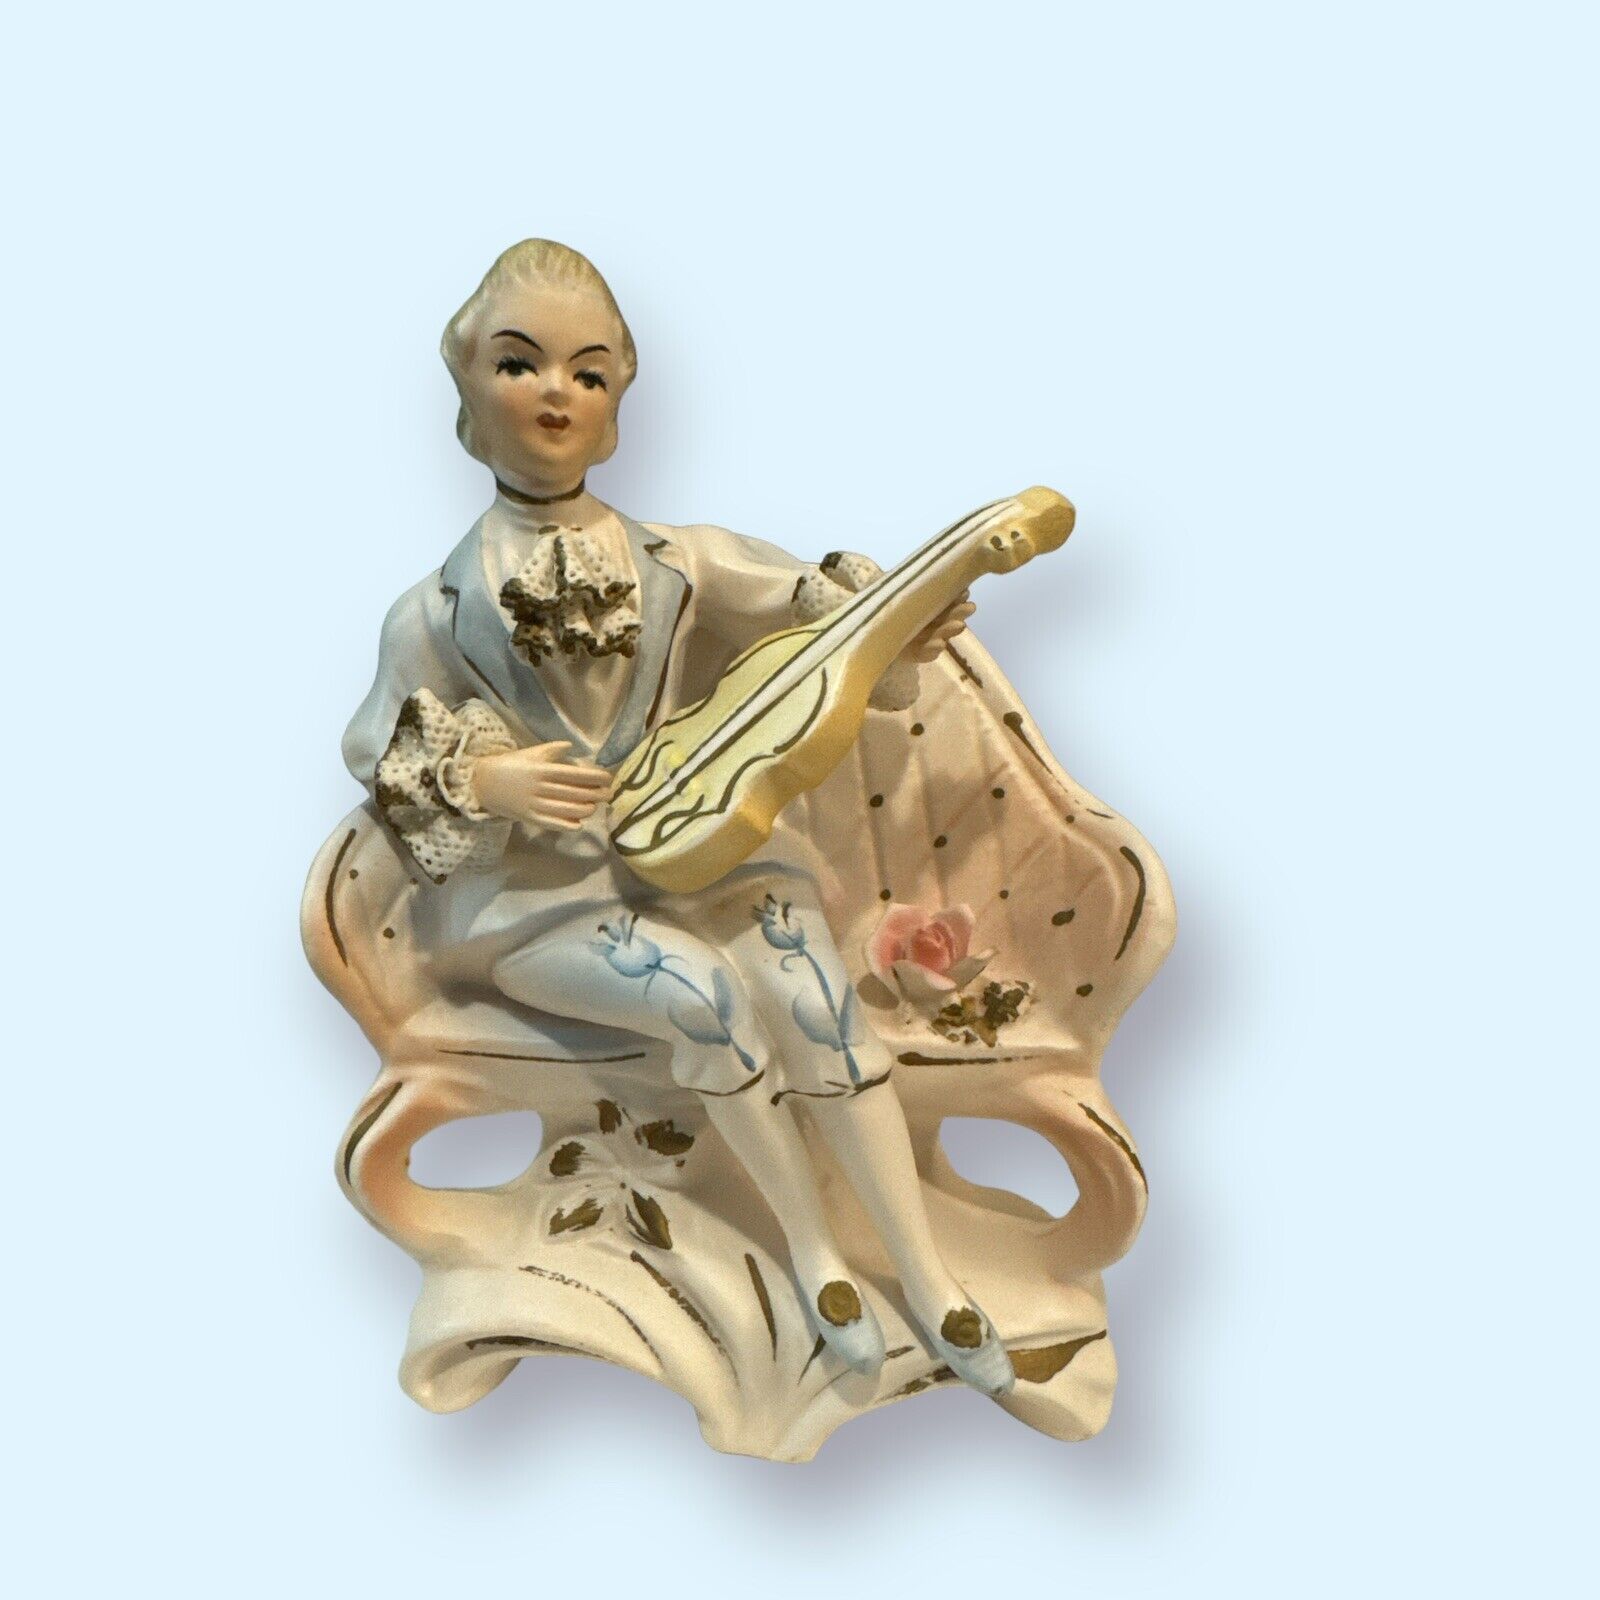 Lovely Vintage Tilso Japan Handpainted Figurine Sitting Playing An Instrument